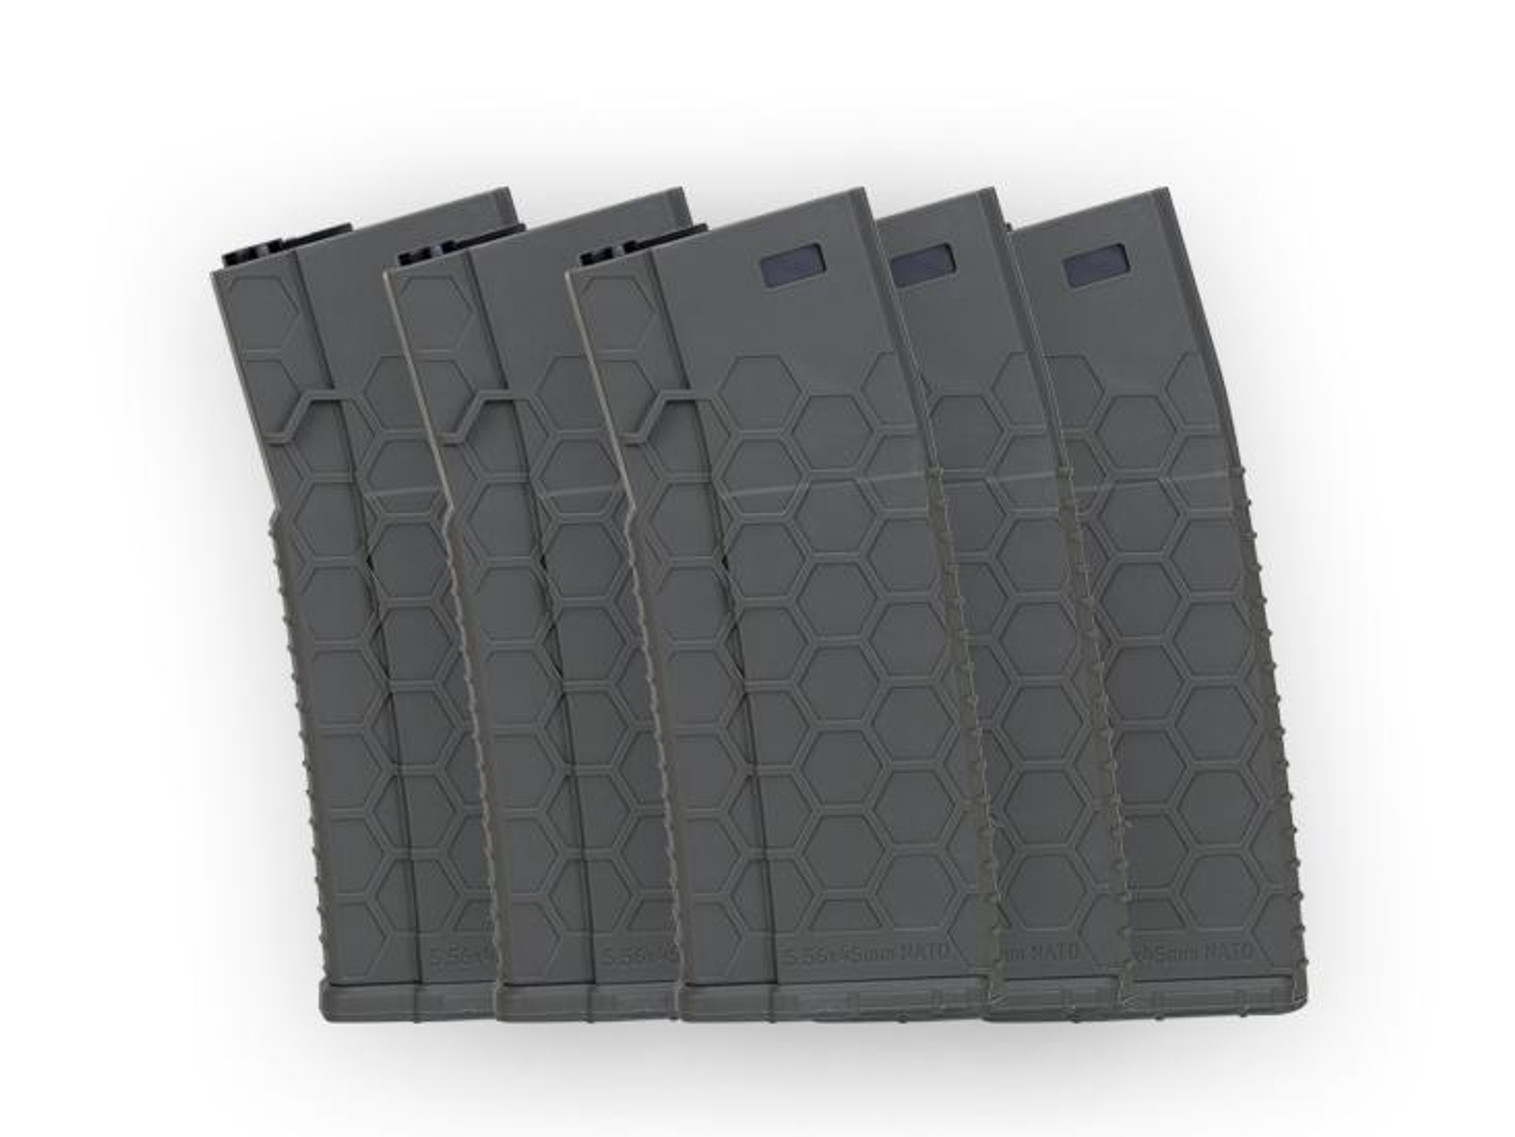 Hexmag Airsoft 120rds Magazine for AEG in OD - Box Set of 5